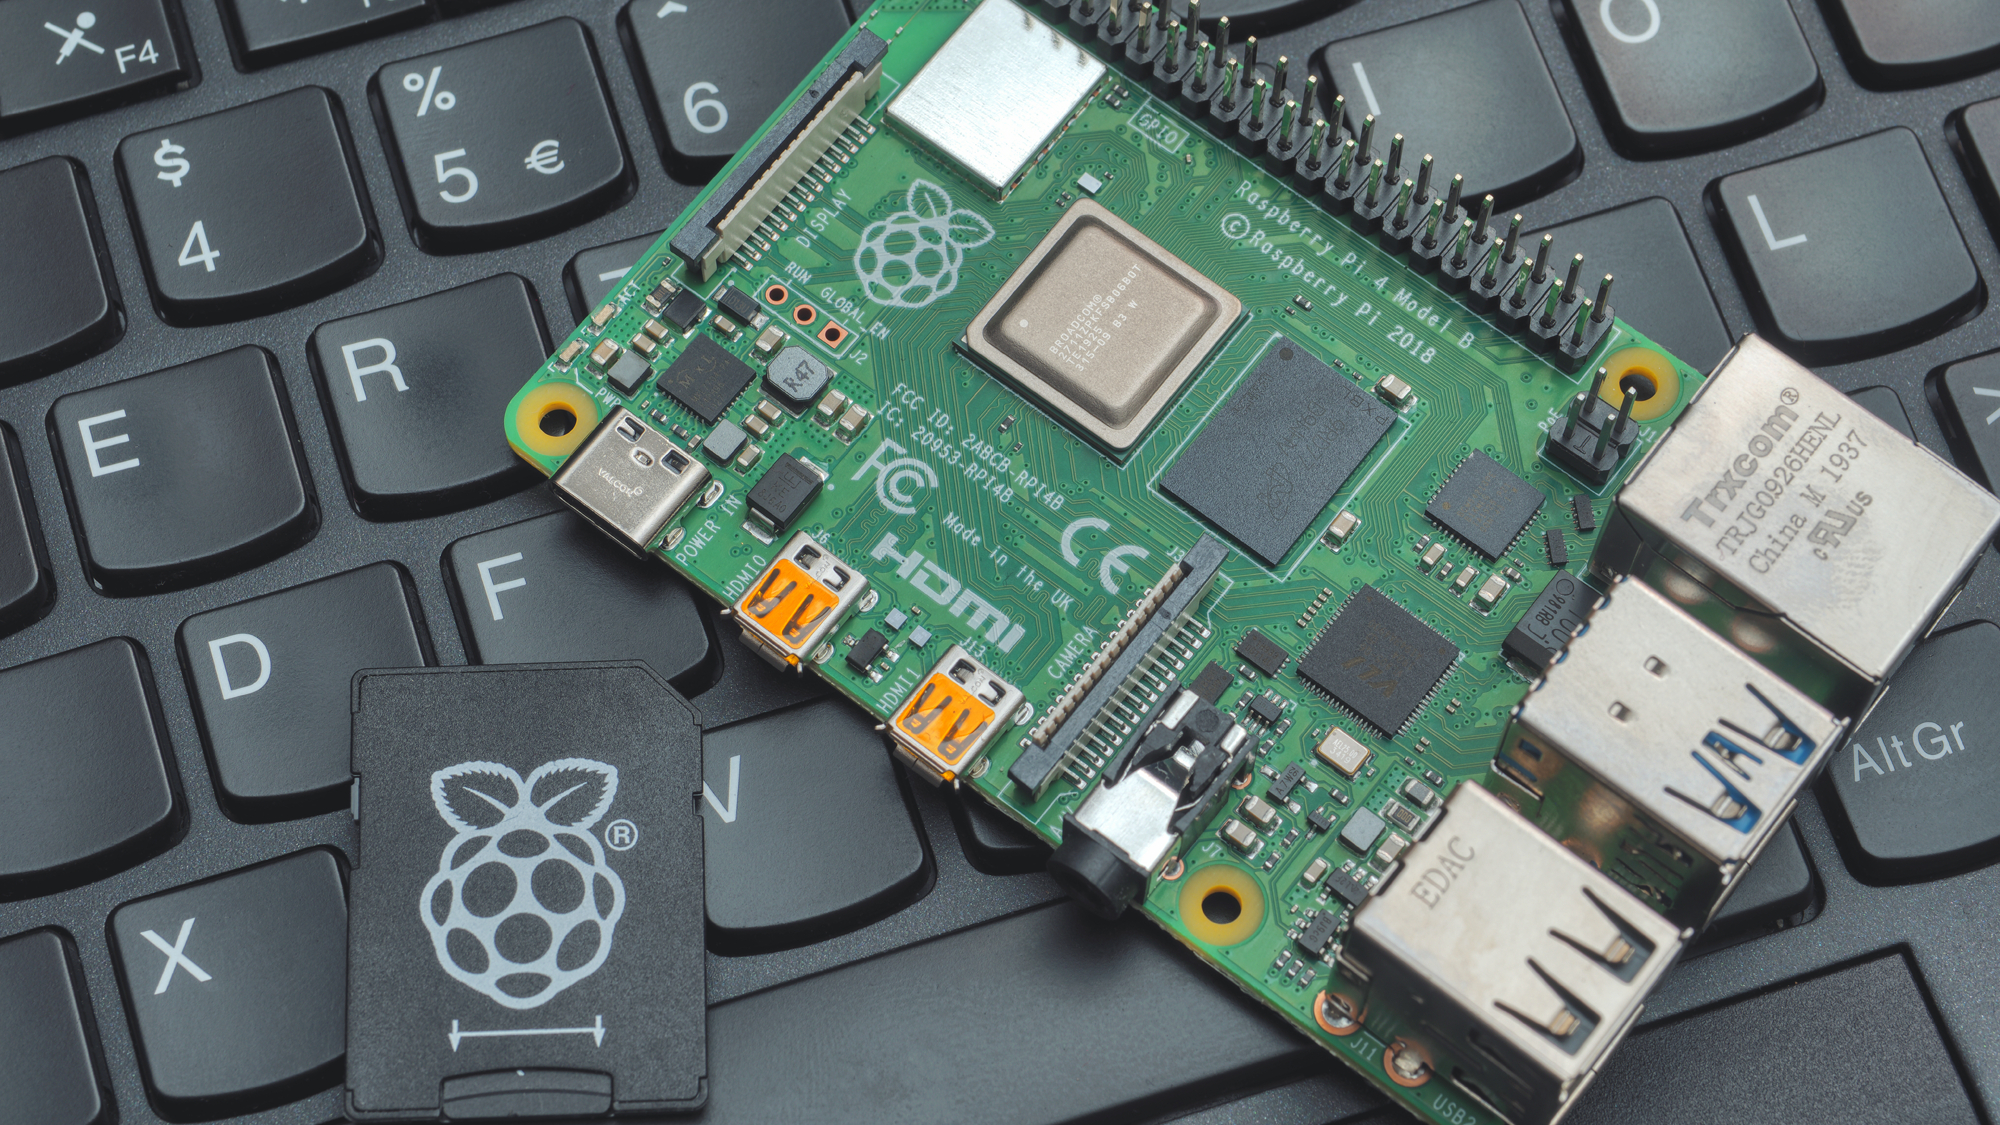 First Look at Raspberry Pi 4